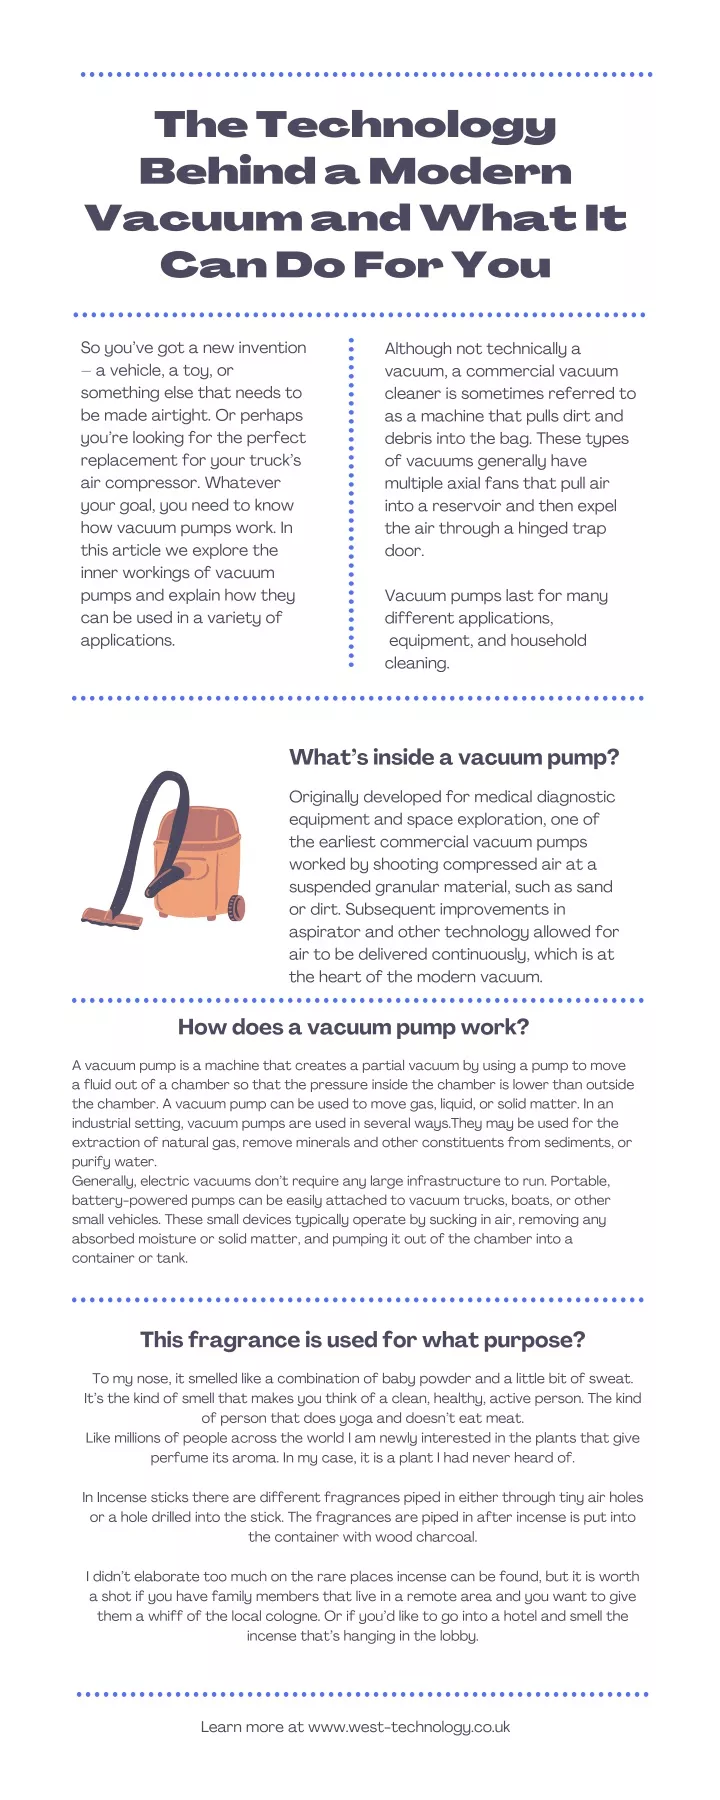 the technology behind a modern vacuum and what